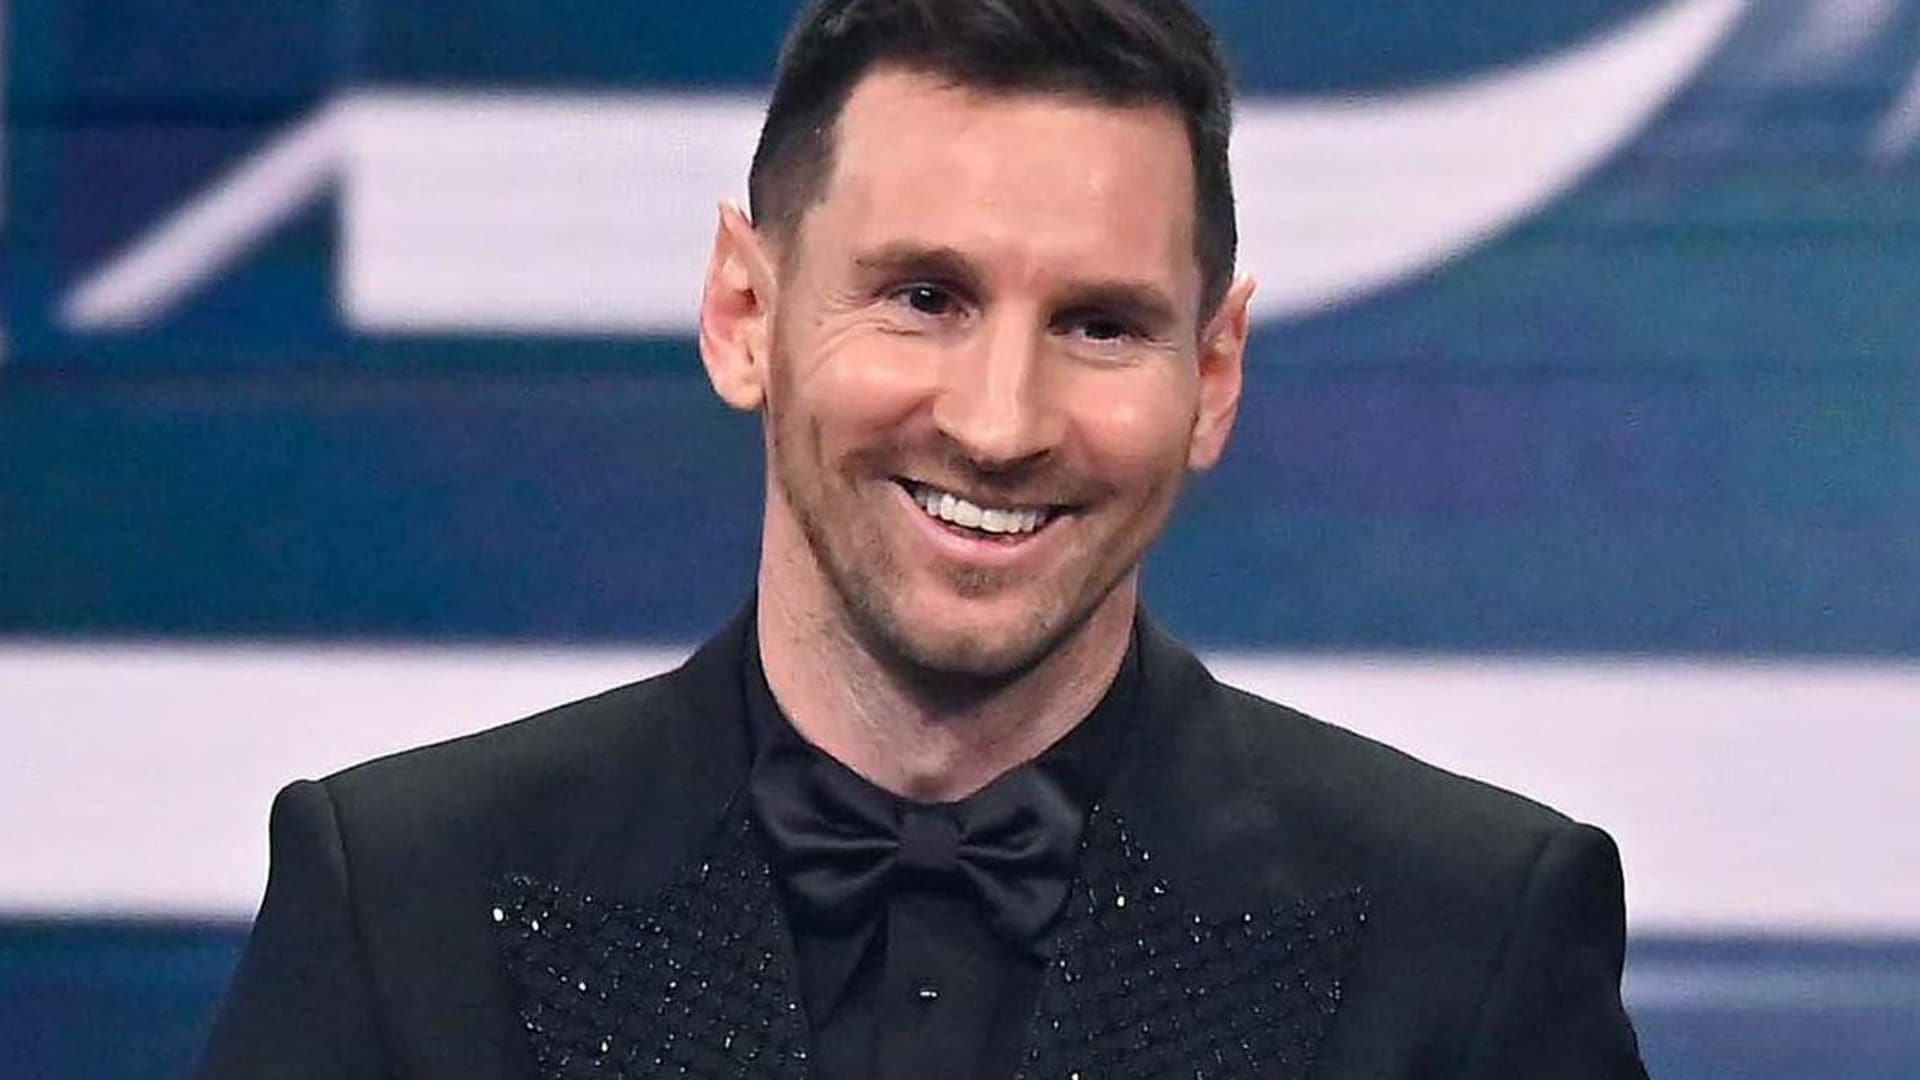 Lionel Messi joined by ‘Ted Lasso’ star in Super Bowl ad: Watch